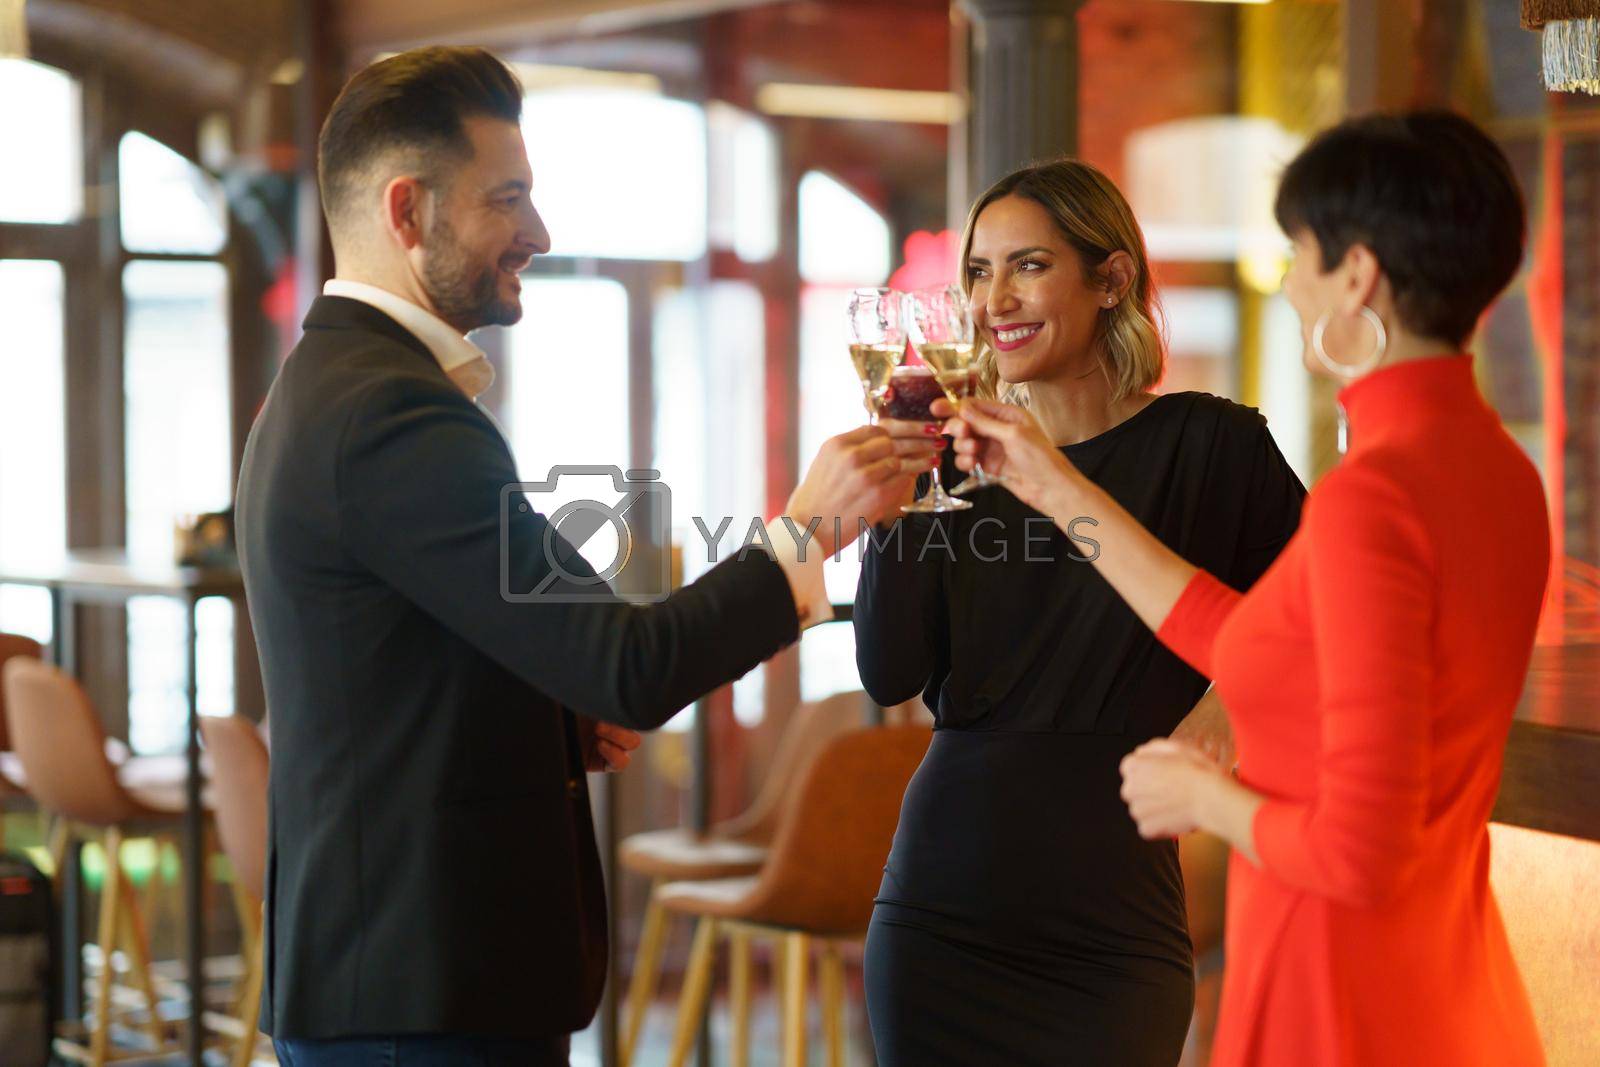 Royalty free image of Delighted friends clinking glasses in an elegant restaurant by javiindy